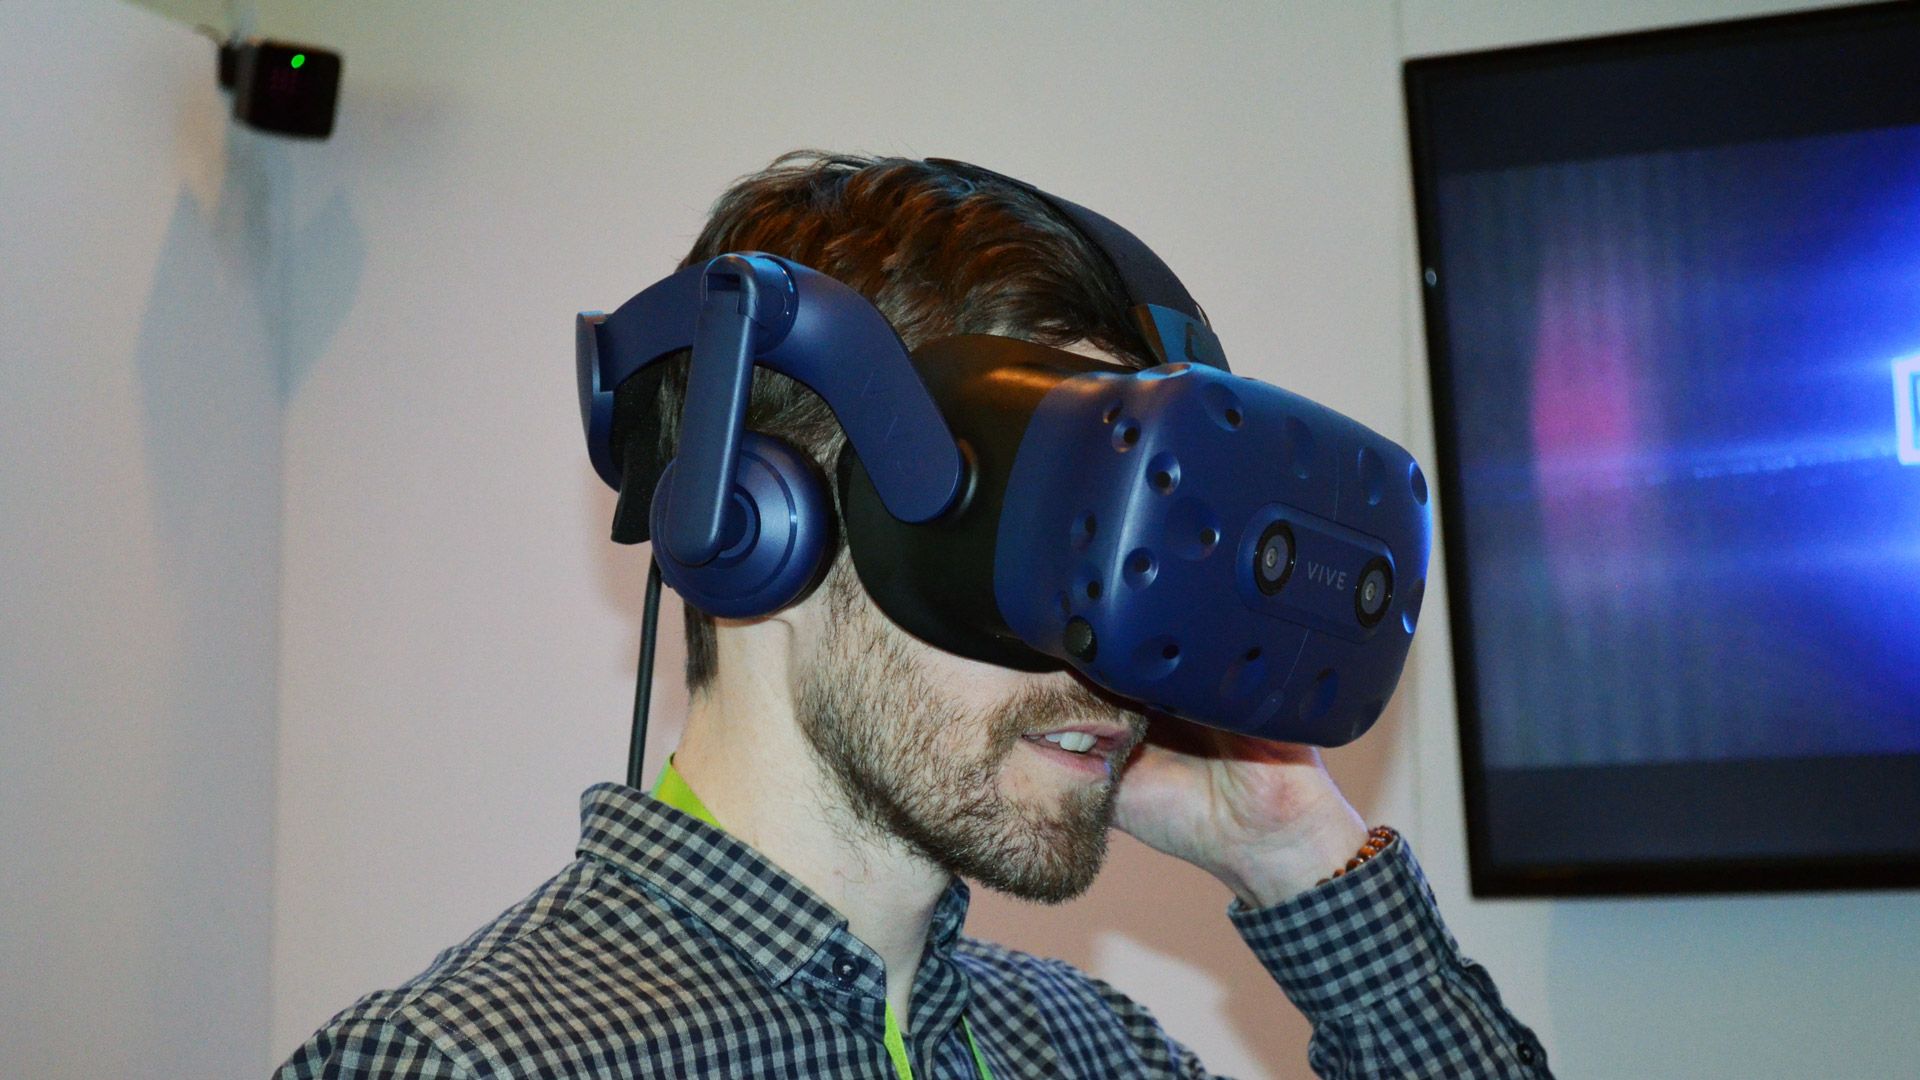 HTC Vive Pro review: Virtual reality without the rough, blurry edges